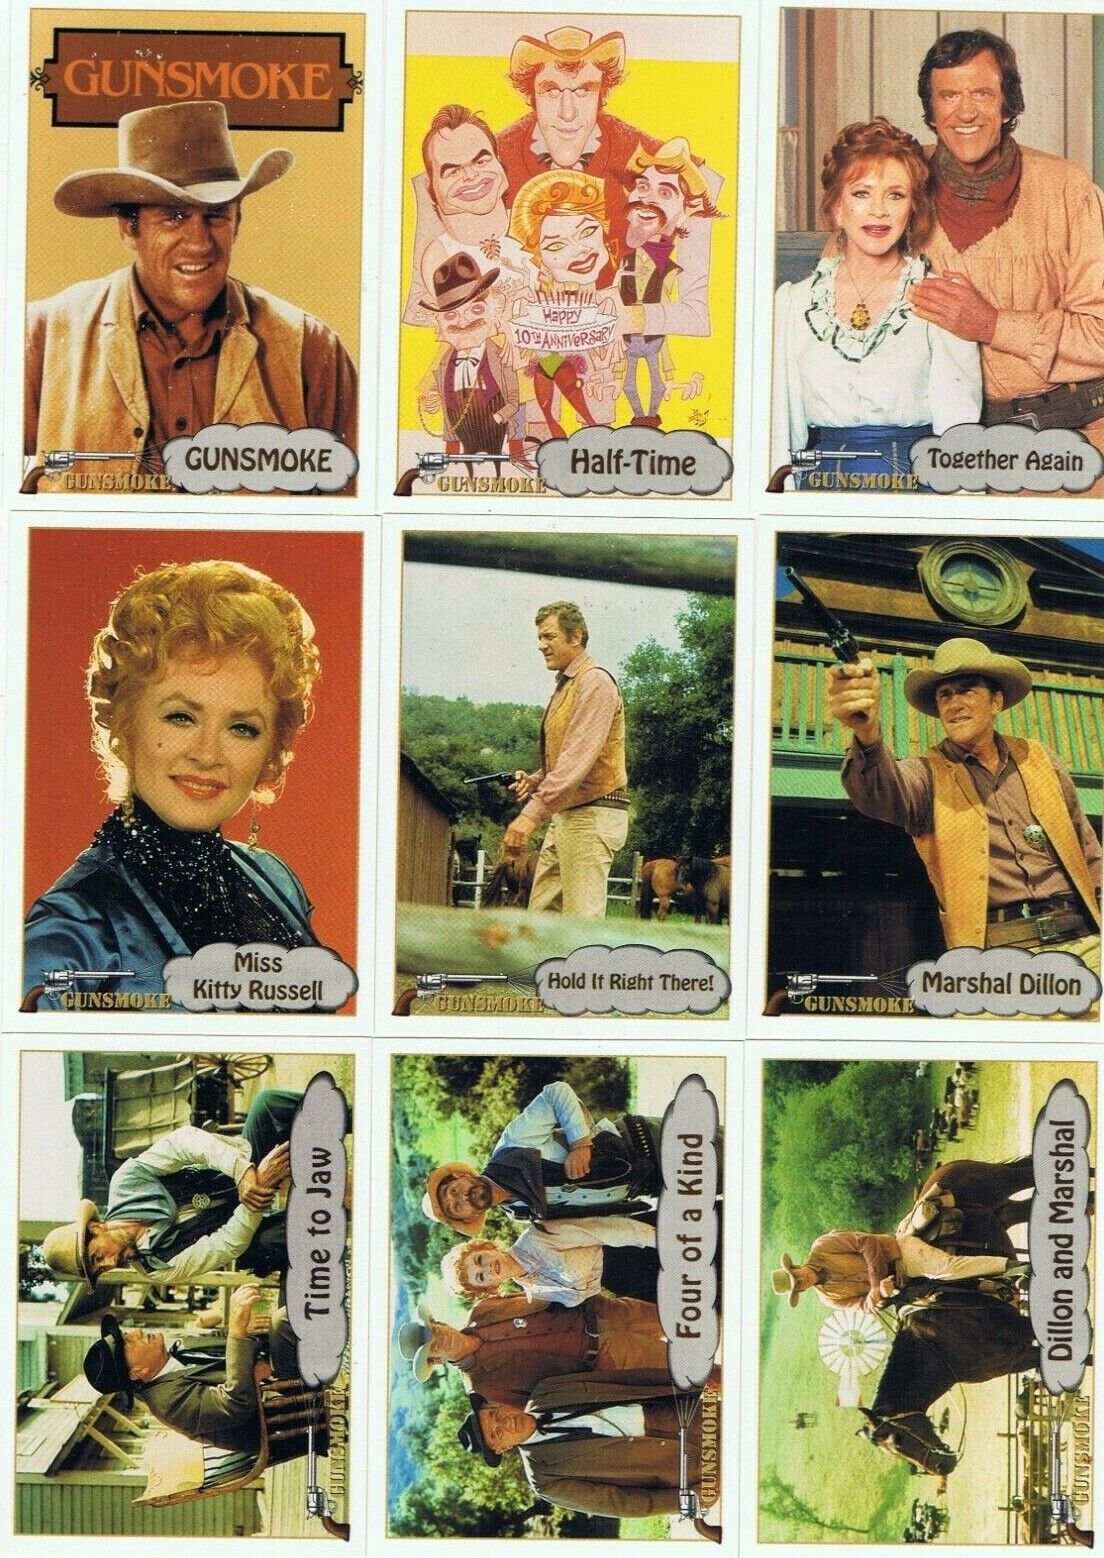 Gunsmoke 1993 Pacific Trading. Singles Check From List. Cards $1.00 + discounts